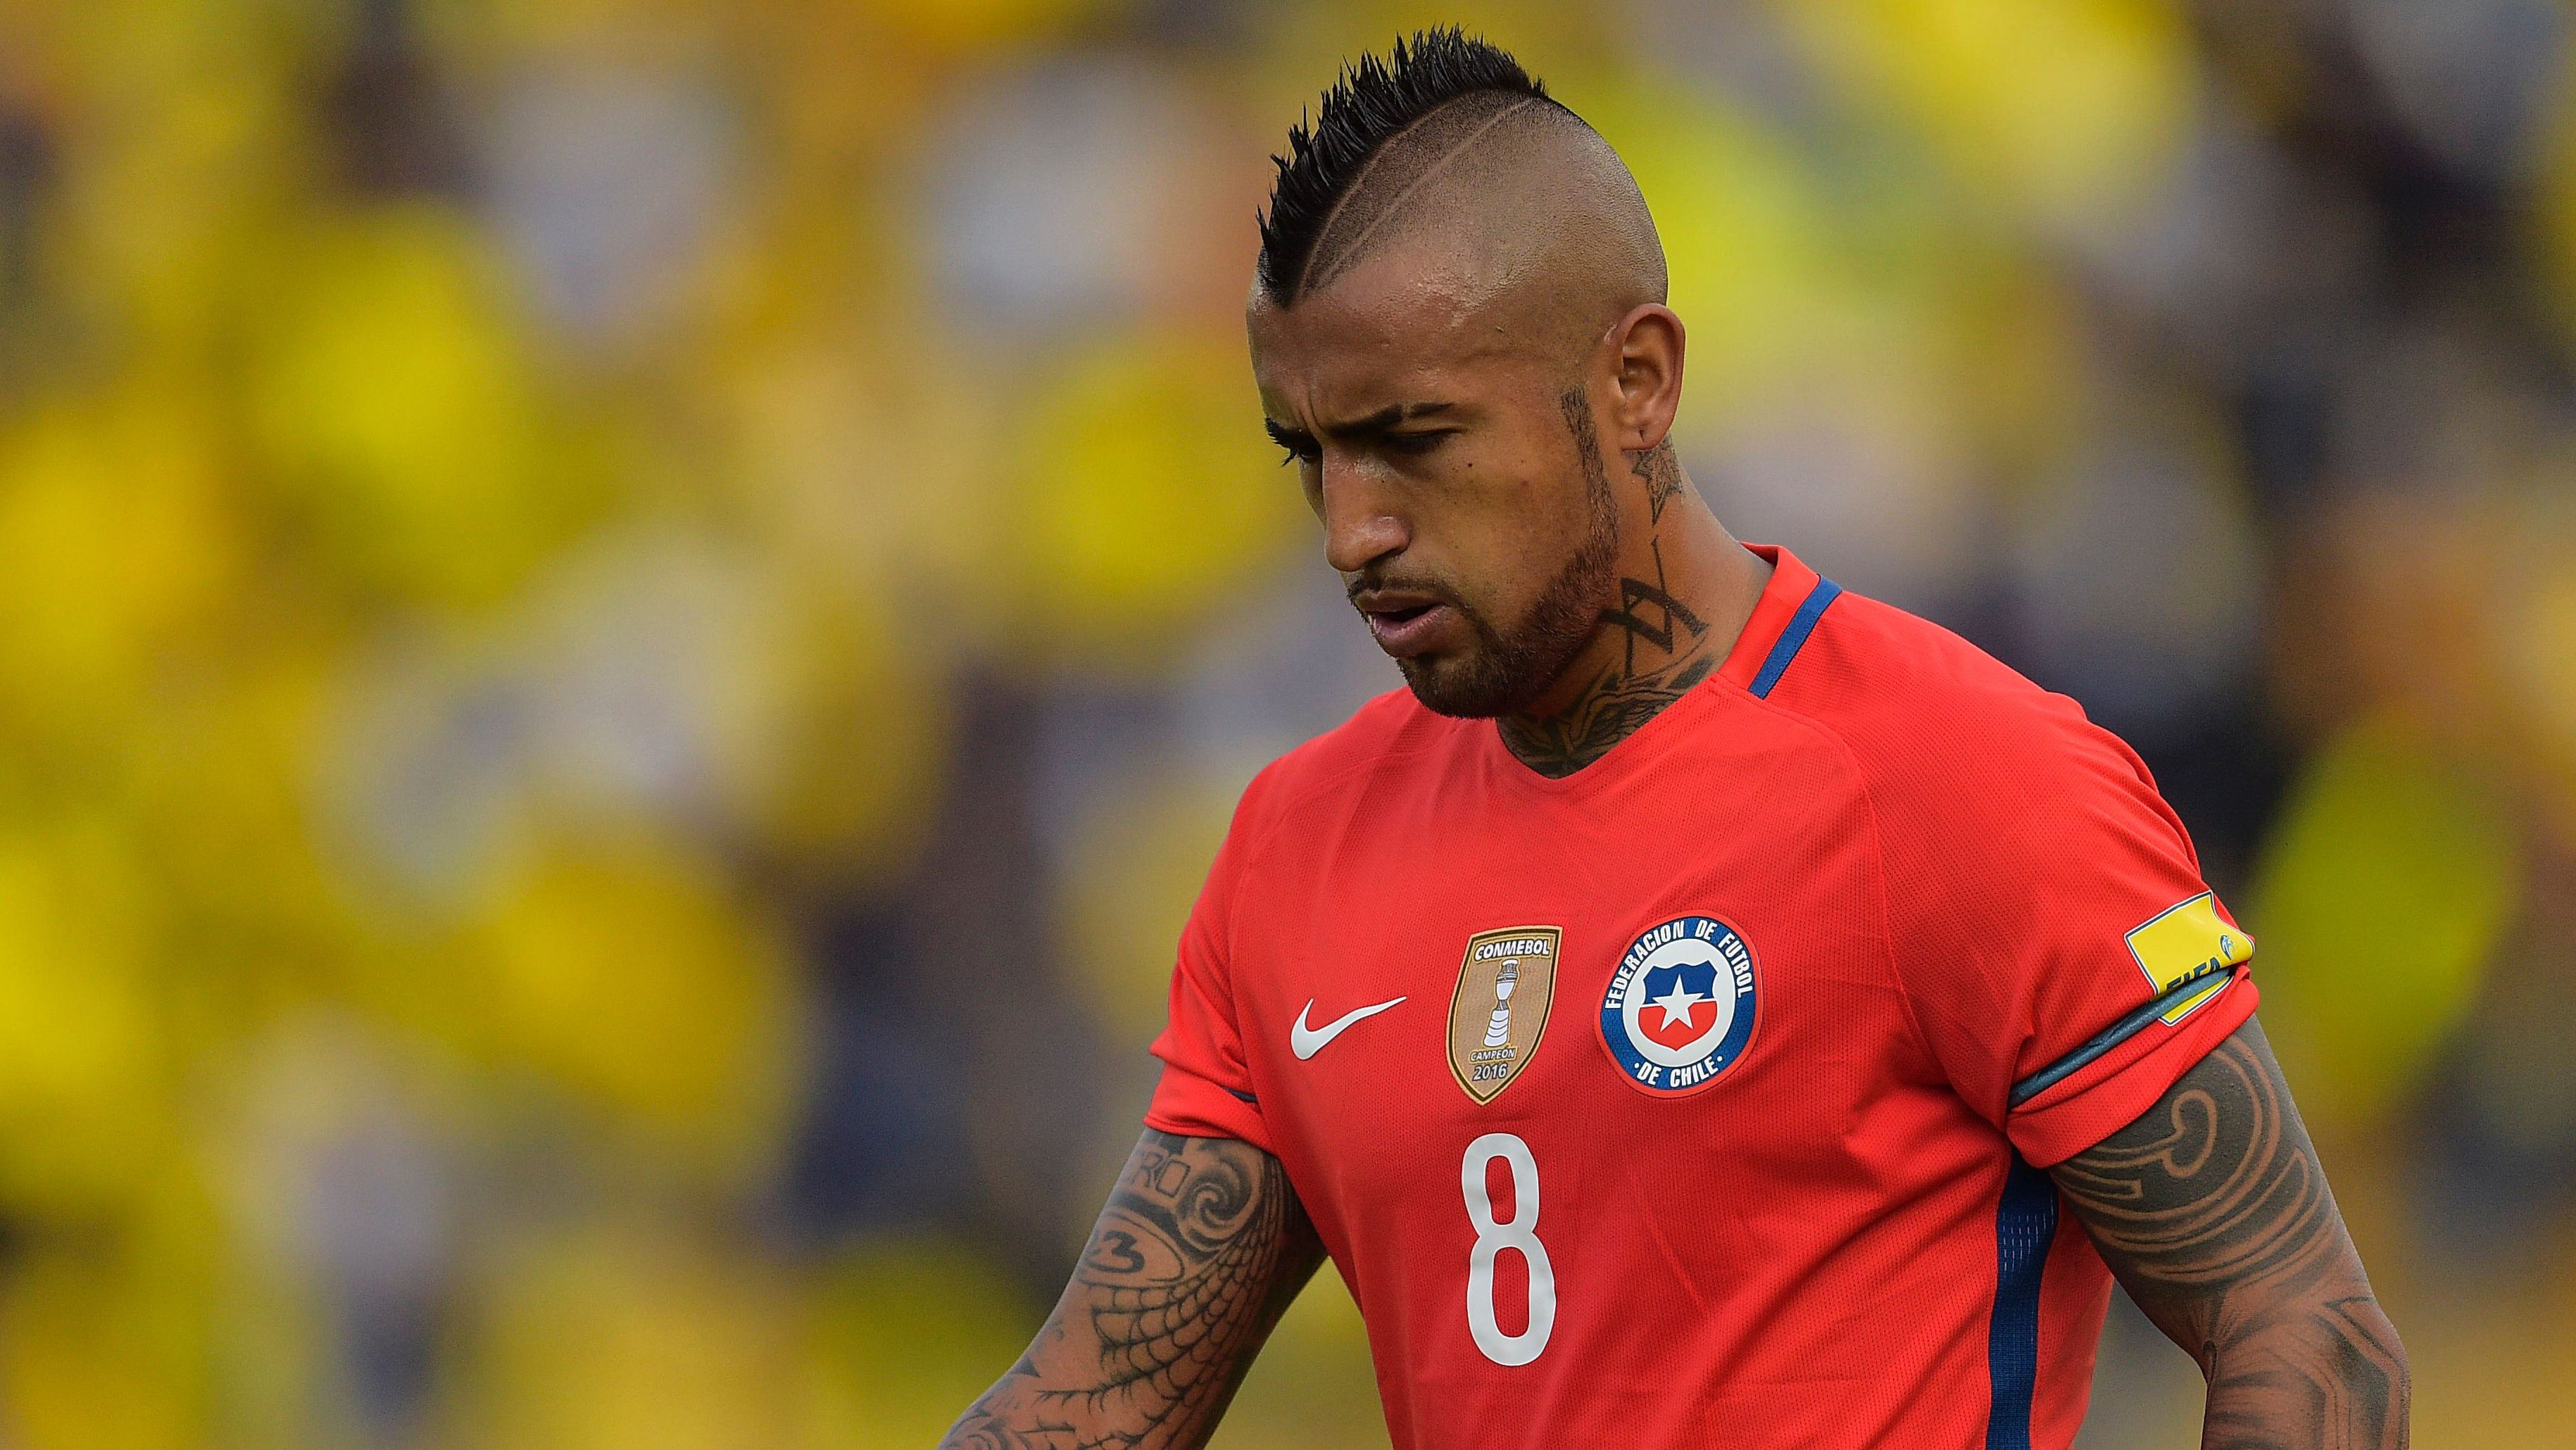 Chile vs. Peru Live Stream: How to Watch Online For Free ...